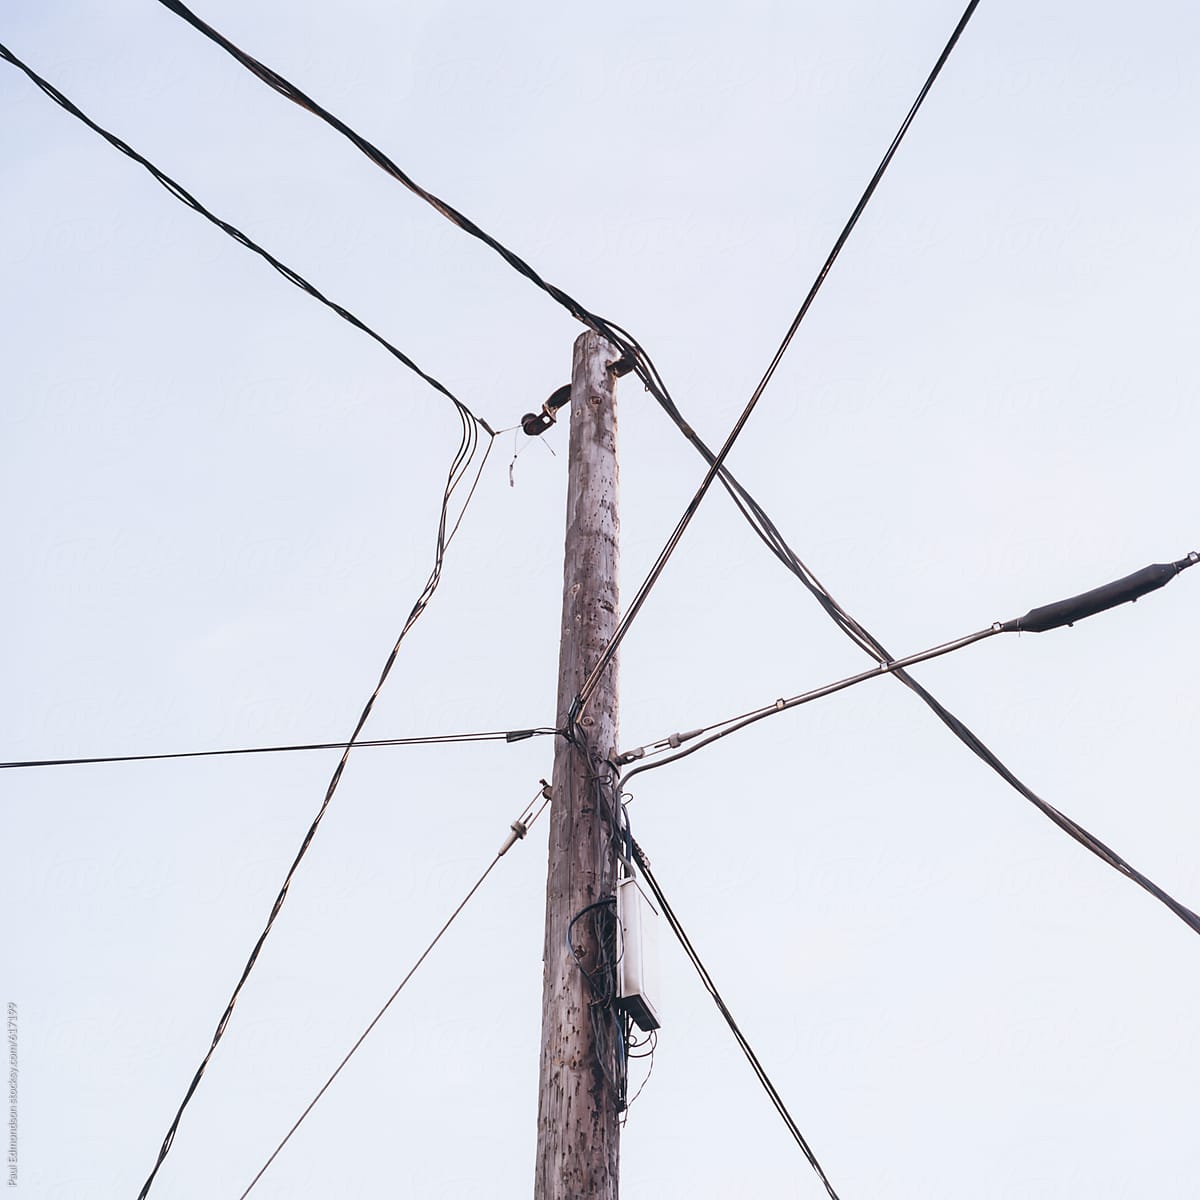 Wires and telephone pole